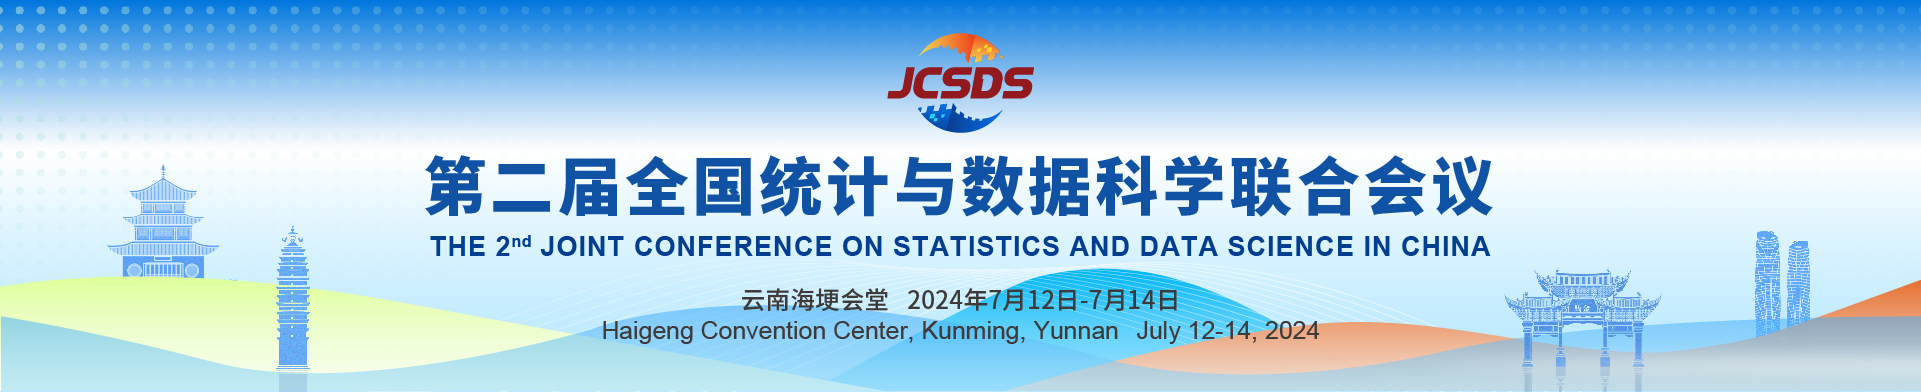 THE 2nd JOINT CONFERENCE ON STATISTICS AND DATA SCIENCE IN CHINA